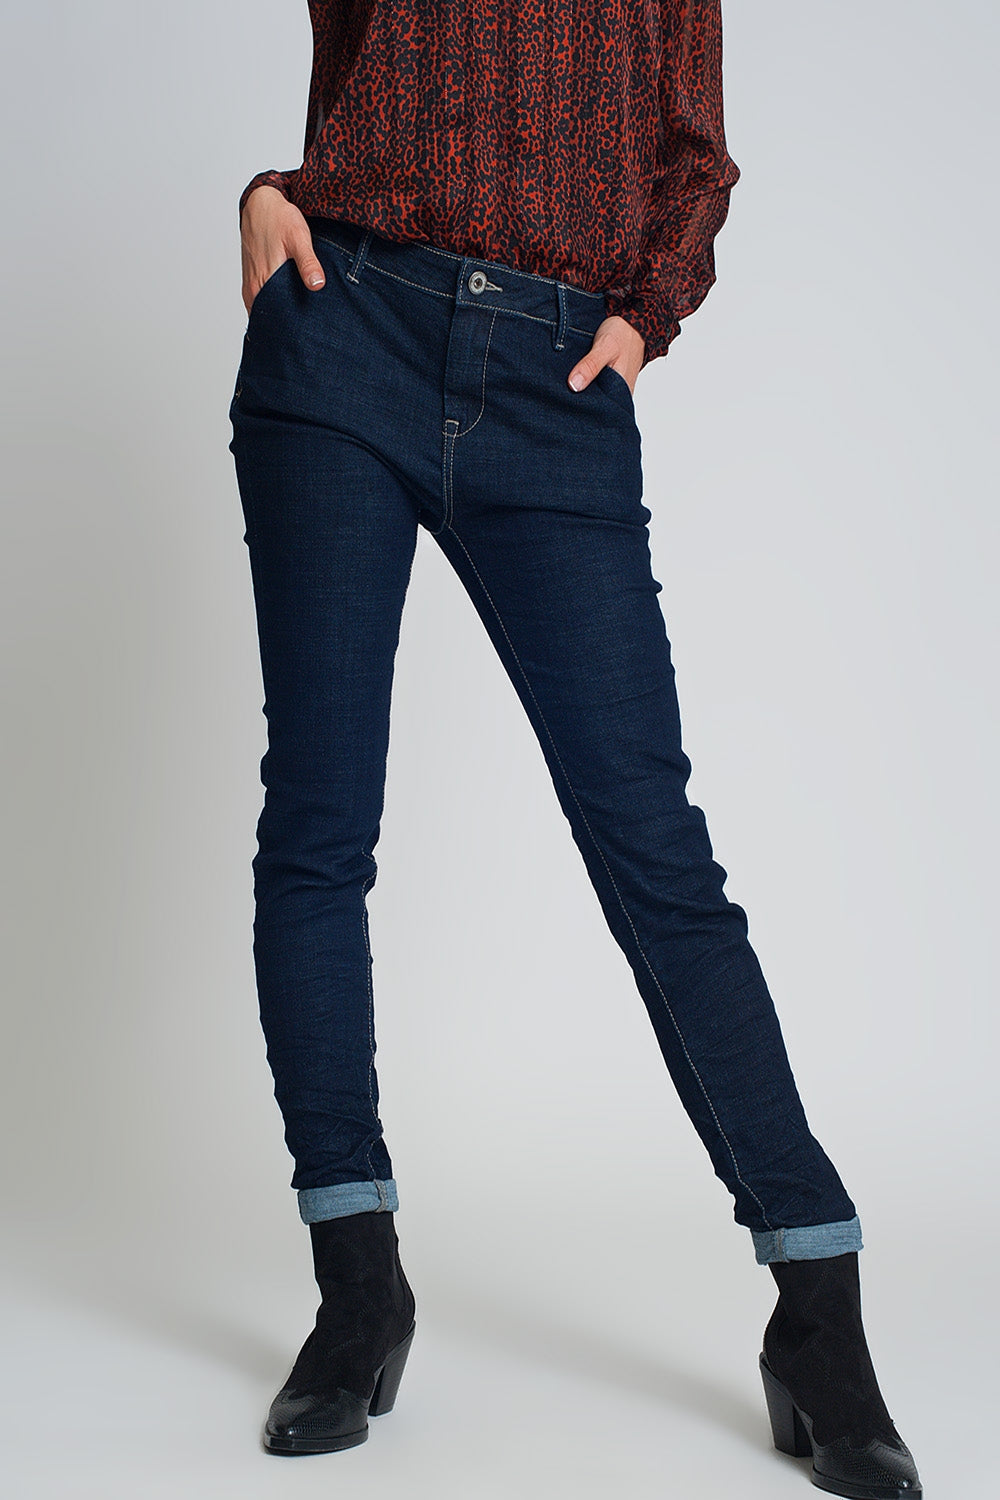 Jeans skinny cut chino style